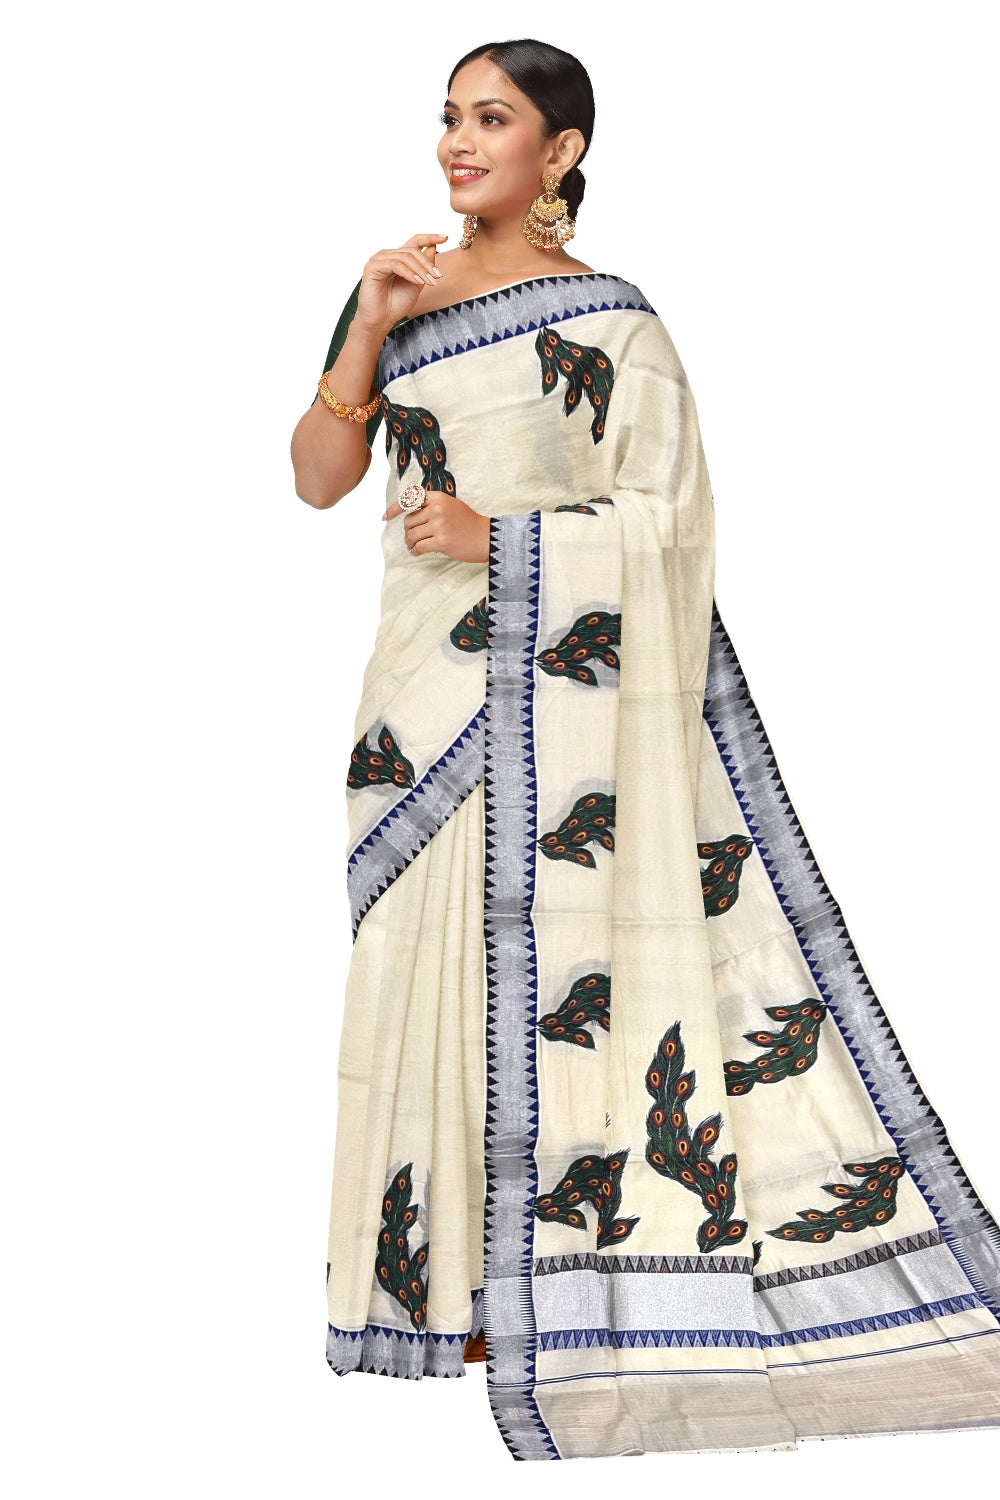 Kerala Pure Cotton Saree with Mural Printed Feather Design and Blue Brown Temple Border